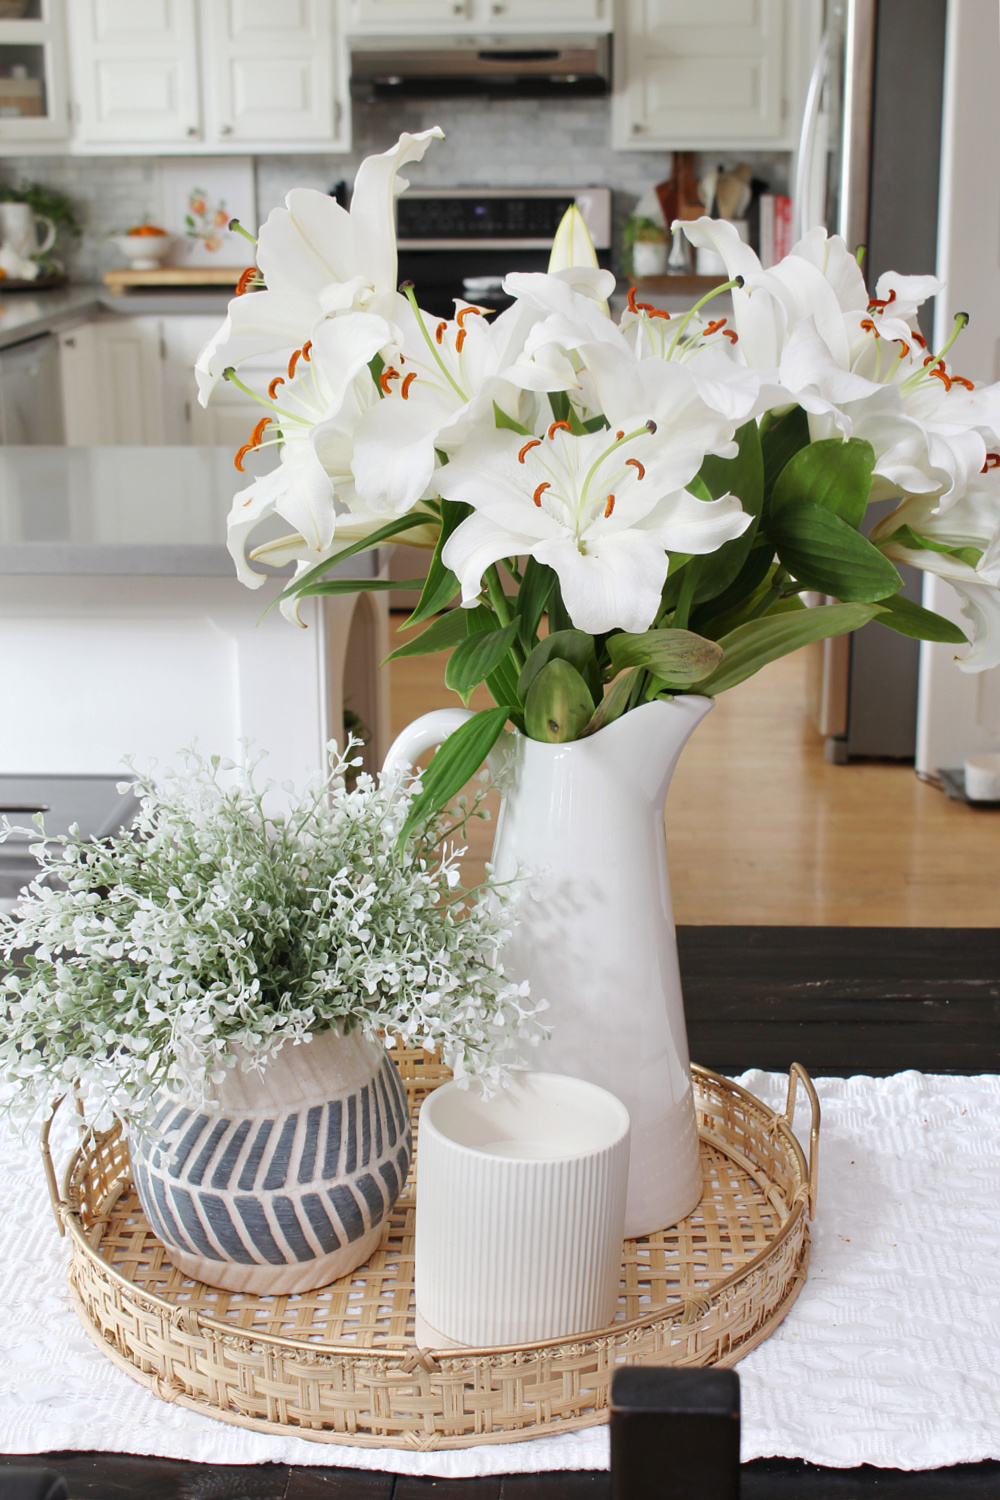 Summer centerpiece with white lilies.